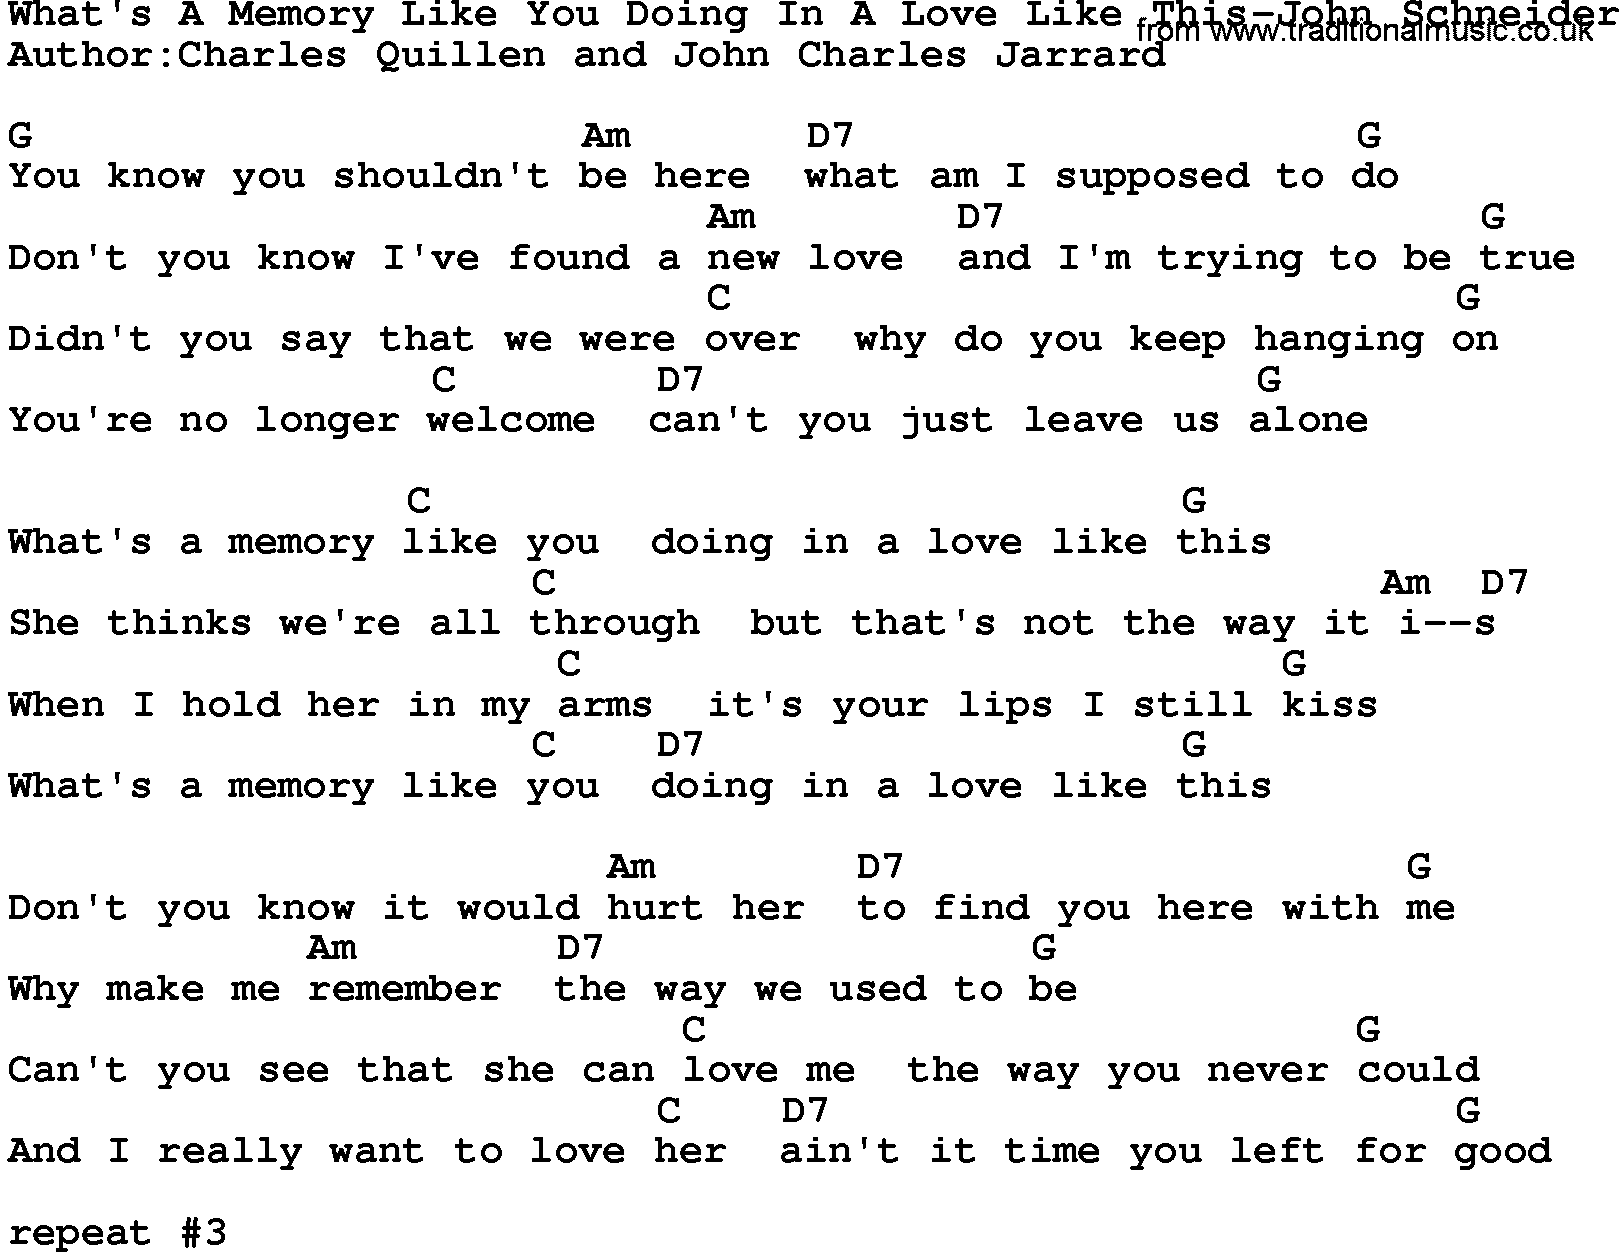 Country music song: What's A Memory Like You Doing In A Love Like This-John Schneider lyrics and chords